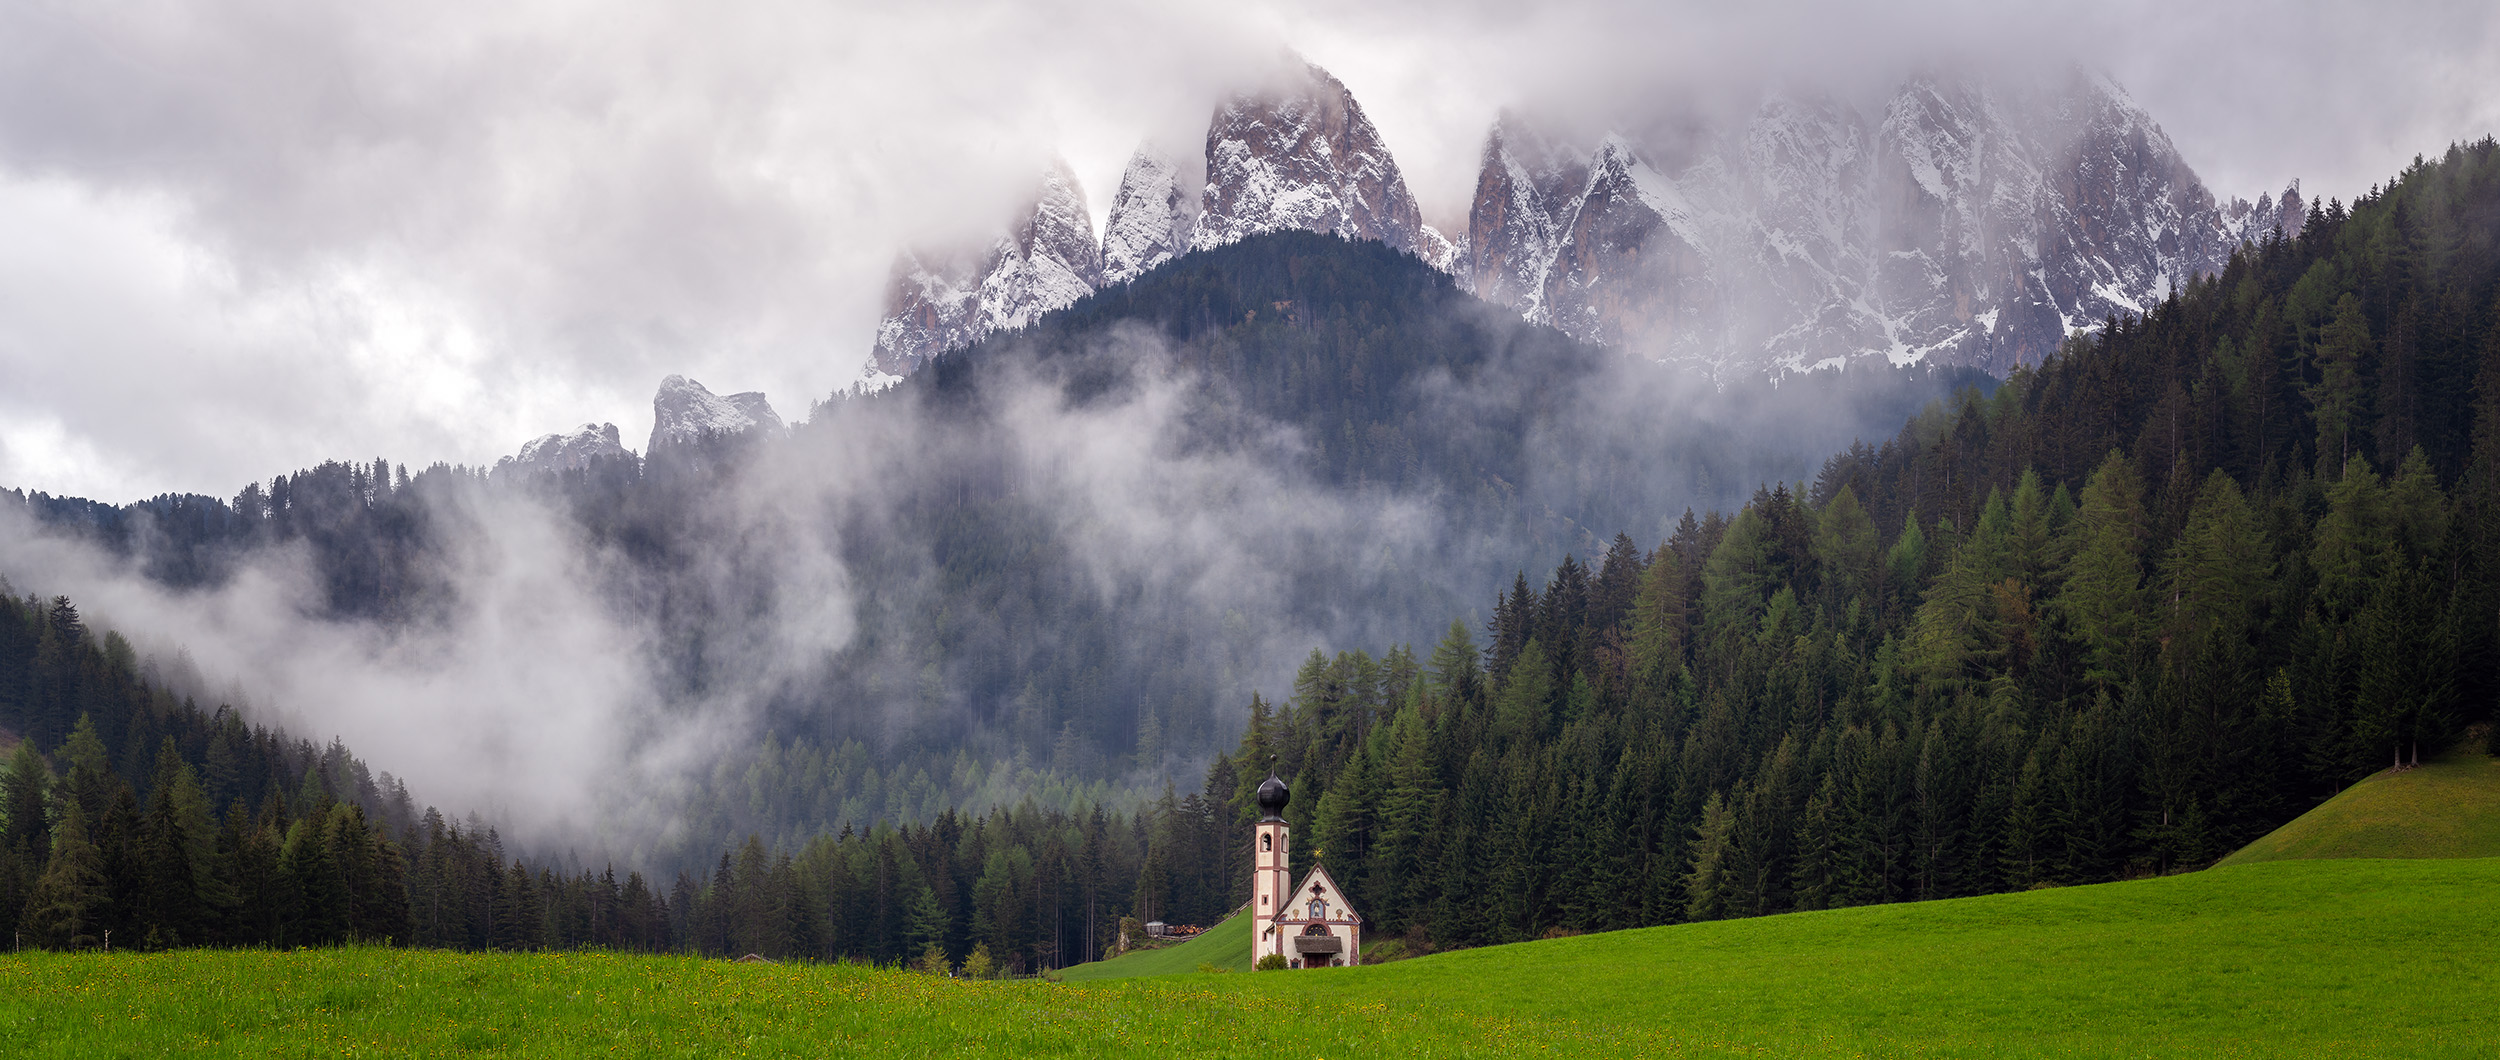 Words fail to describe the awe-inspiring moment when I encountered this breathtaking scene. The tiny St. Johann's church nestled...